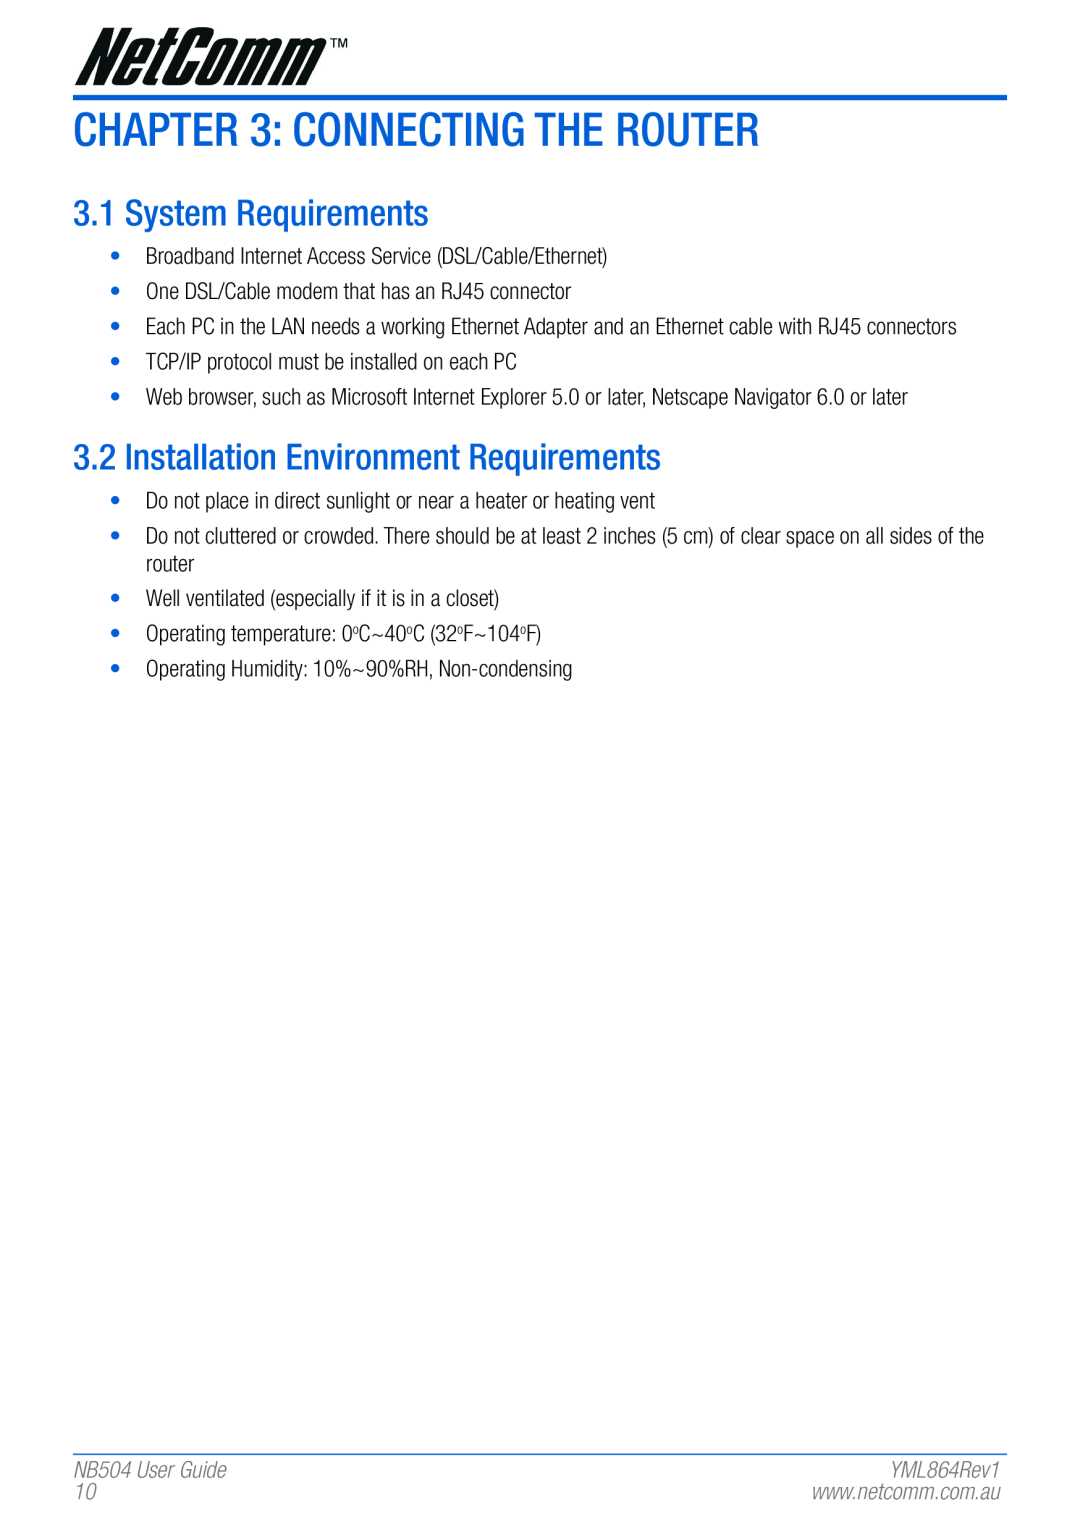 NetComm manual Connecting the Router, System Requirements, Installation Environment Requirements, NB504 User Guide 